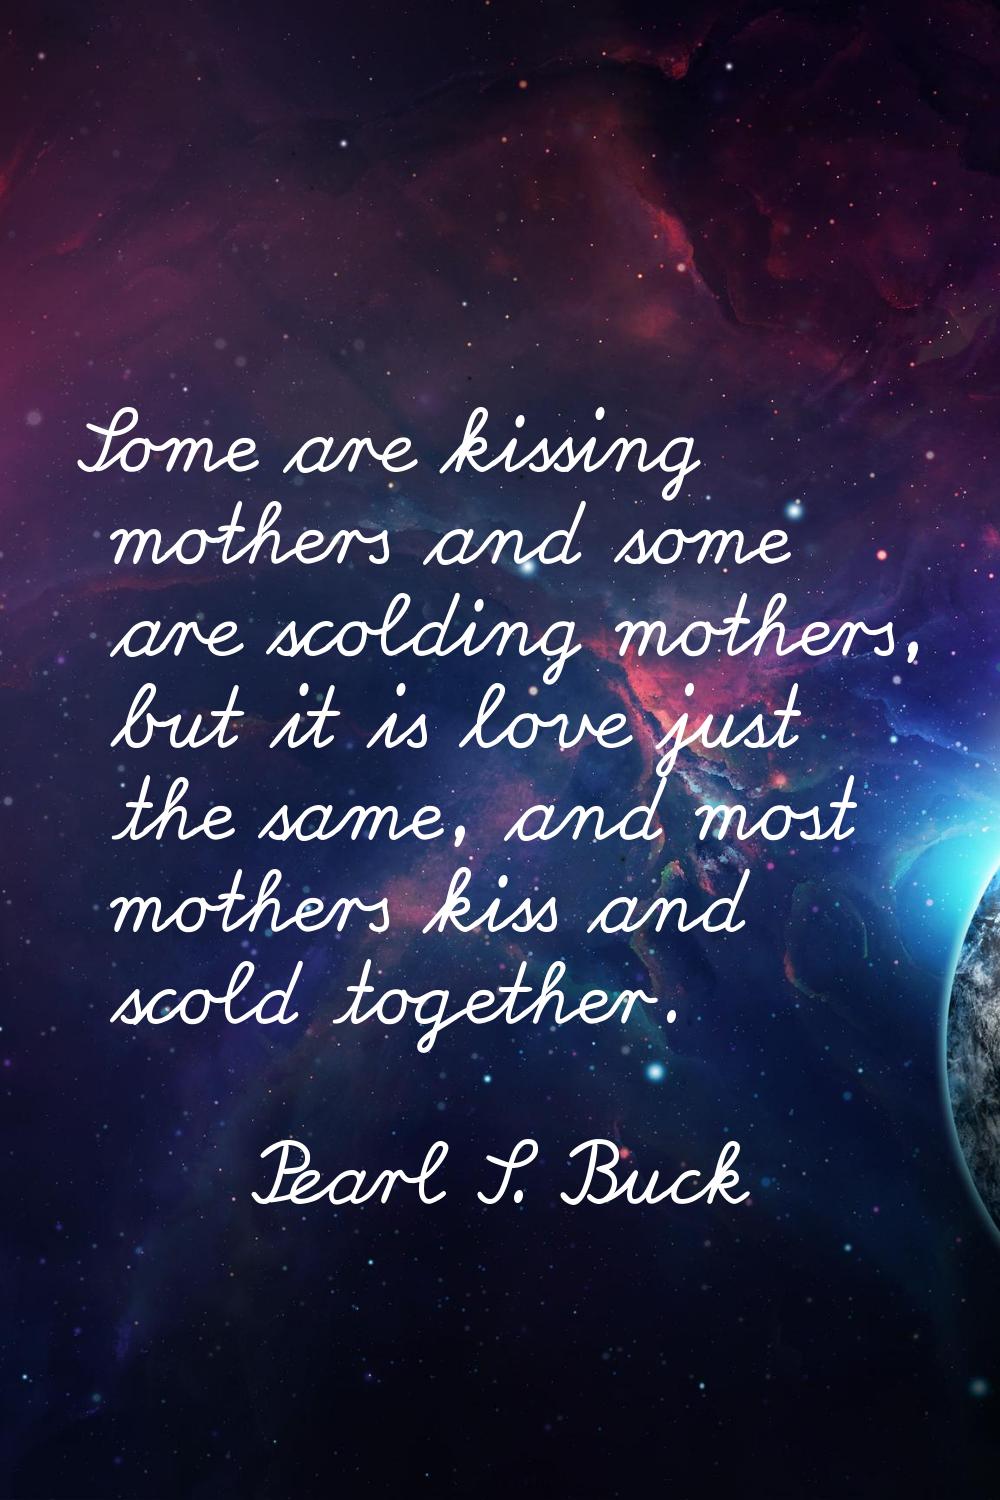 Some are kissing mothers and some are scolding mothers, but it is love just the same, and most moth